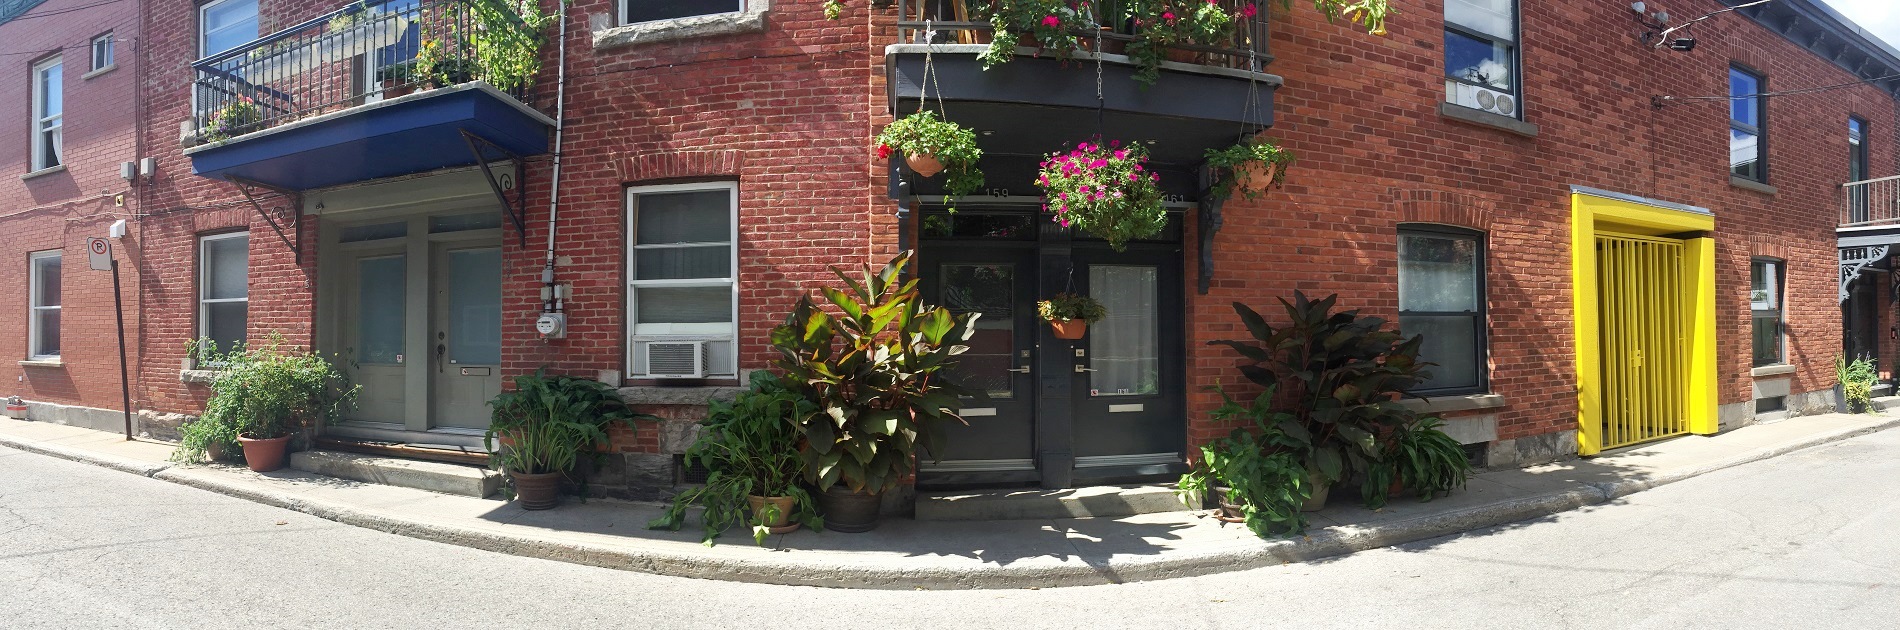 Plateau houses, Montreal attractions, Fun things to do in Montrea,l Plateau mont royal